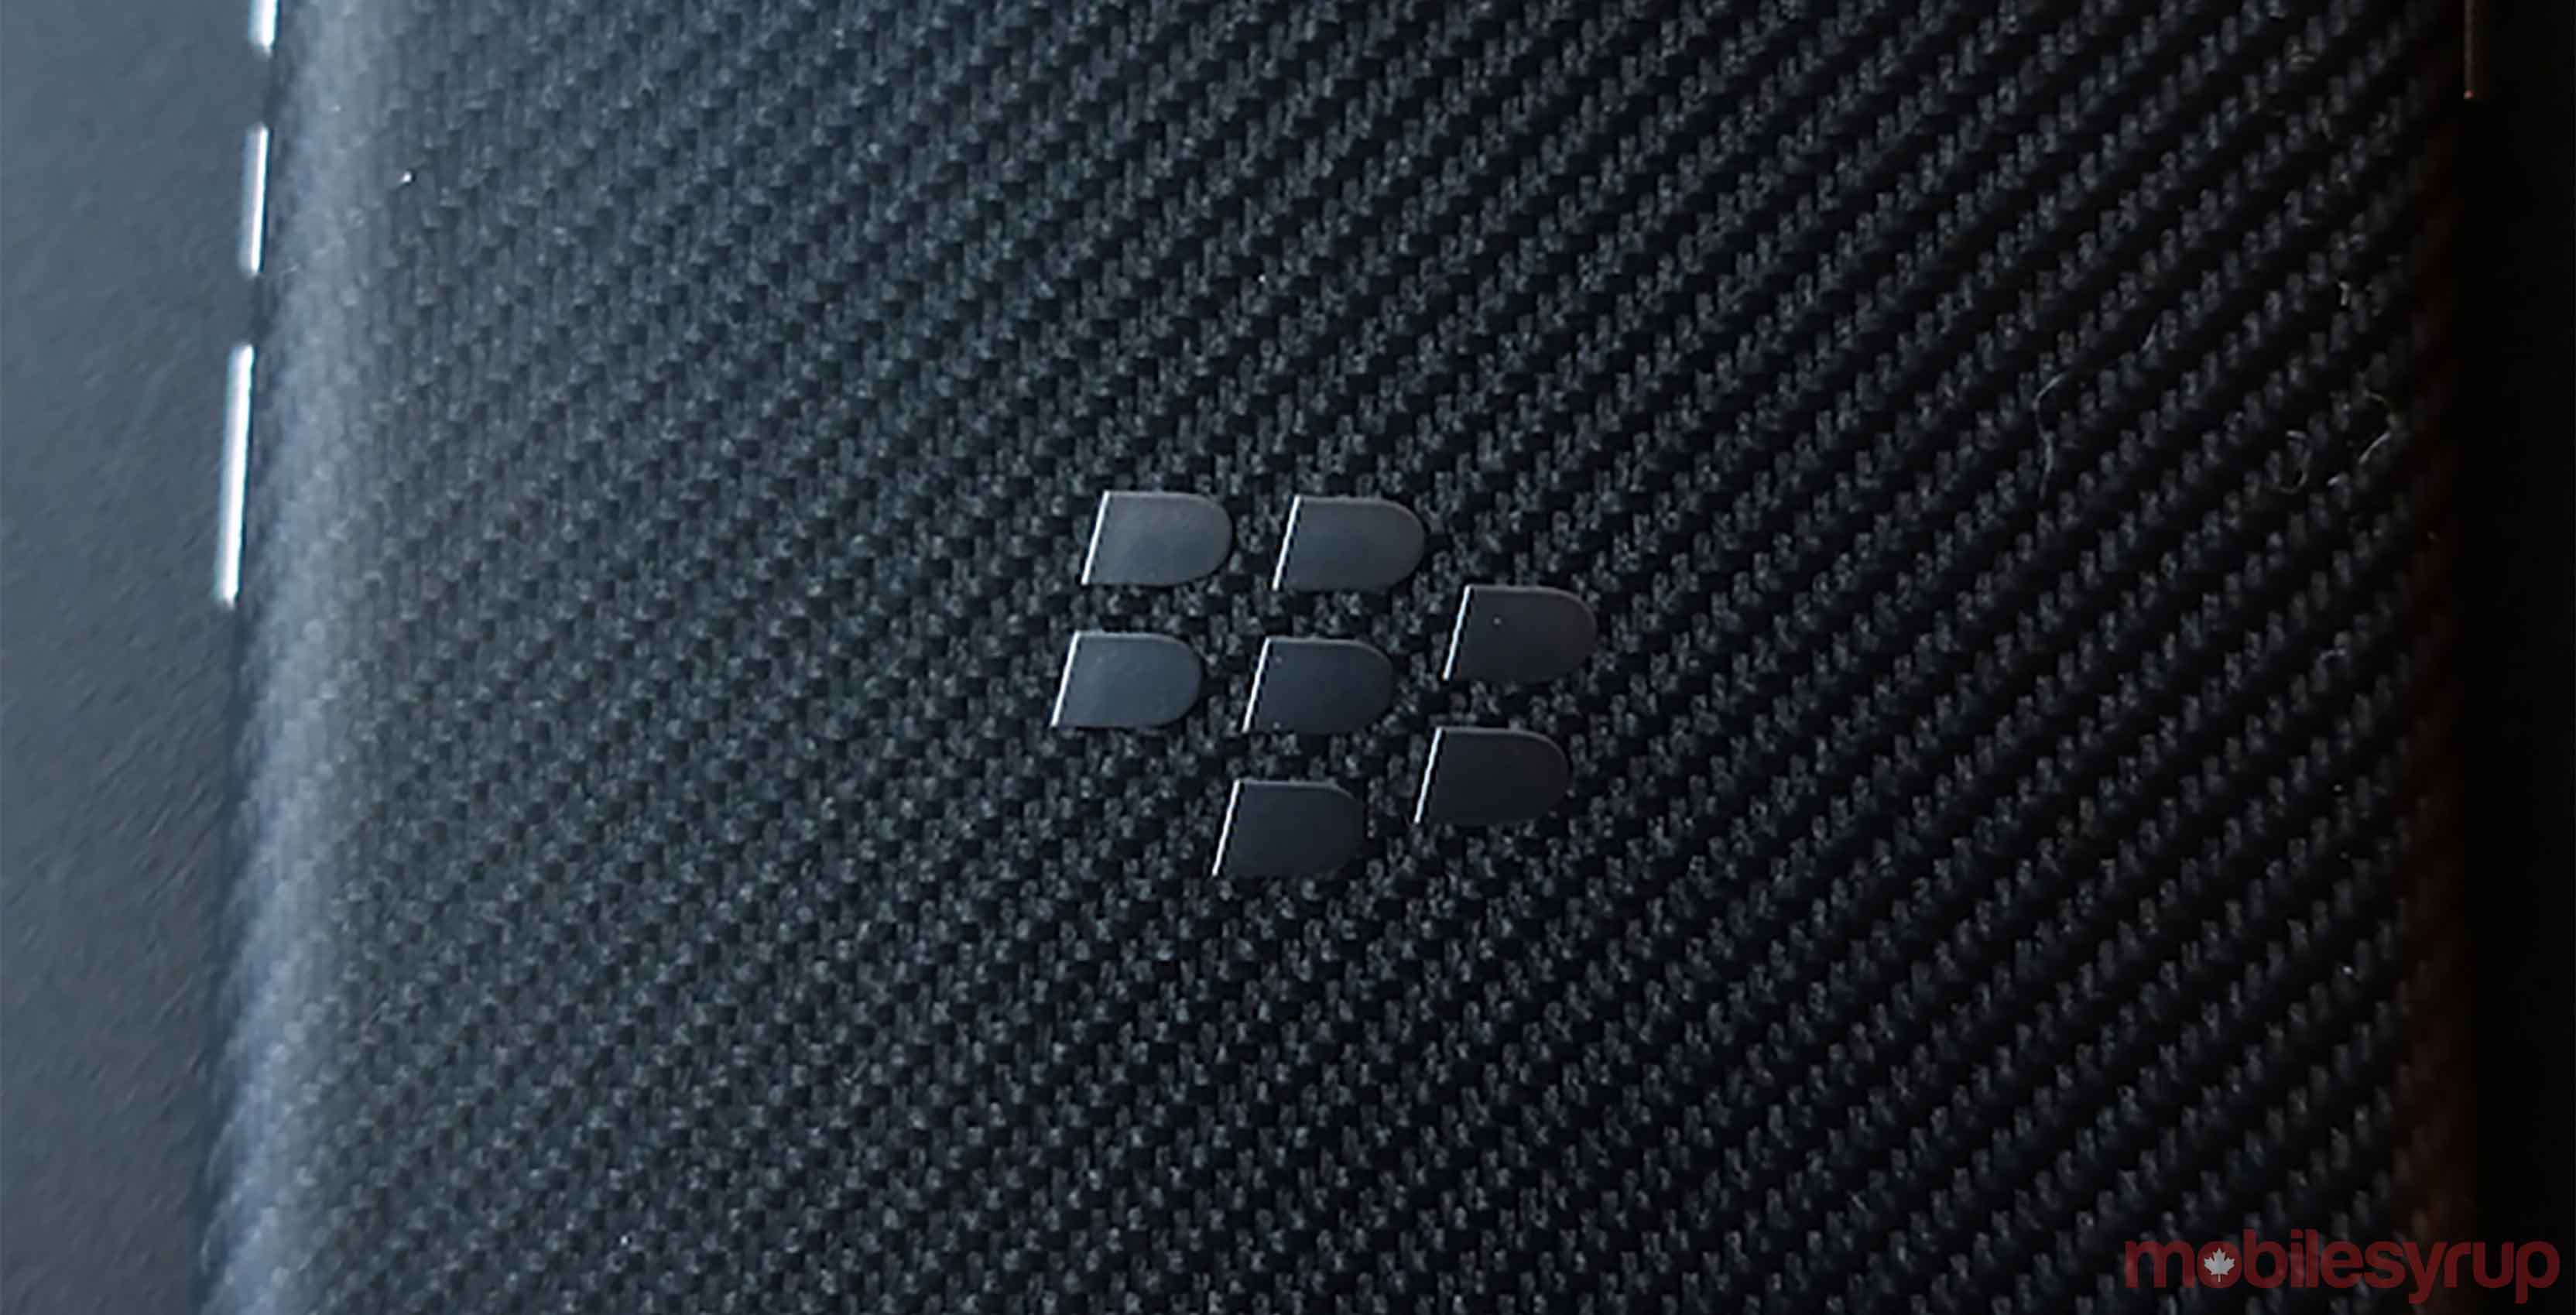 BlackBerry back of phone with logo